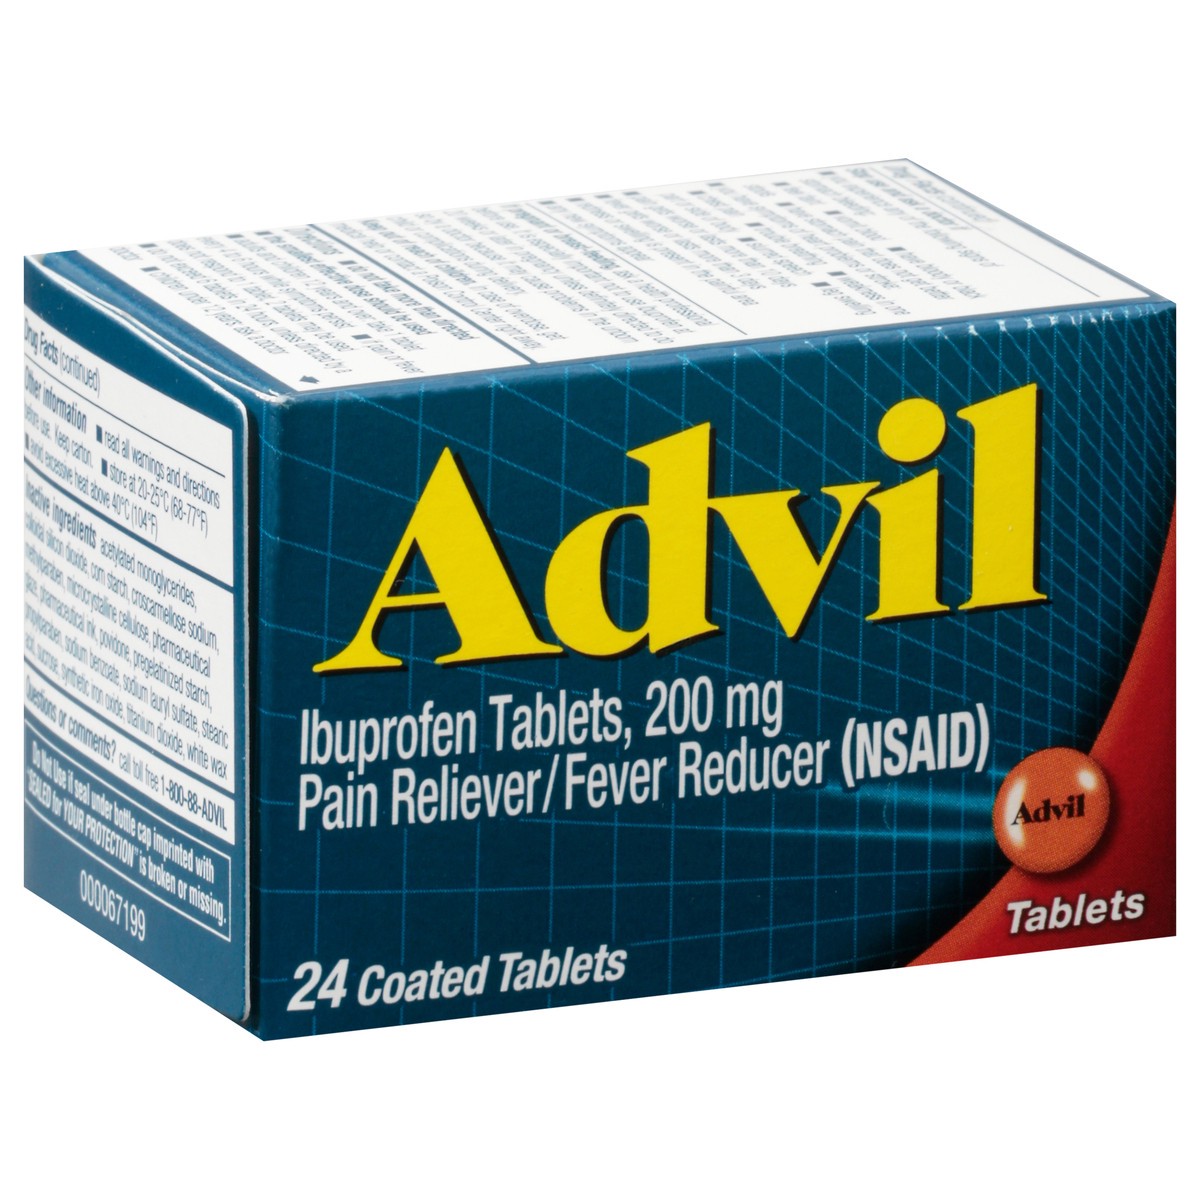 slide 2 of 9, Advil Coated Tablets Pain Reliever and Fever Reducer, Ibuprofen 200mg, 24 Count, Fast-Acting Formula for Headache Relief, Toothache Pain Relief and Arthritis Pain Relief, 24 ct